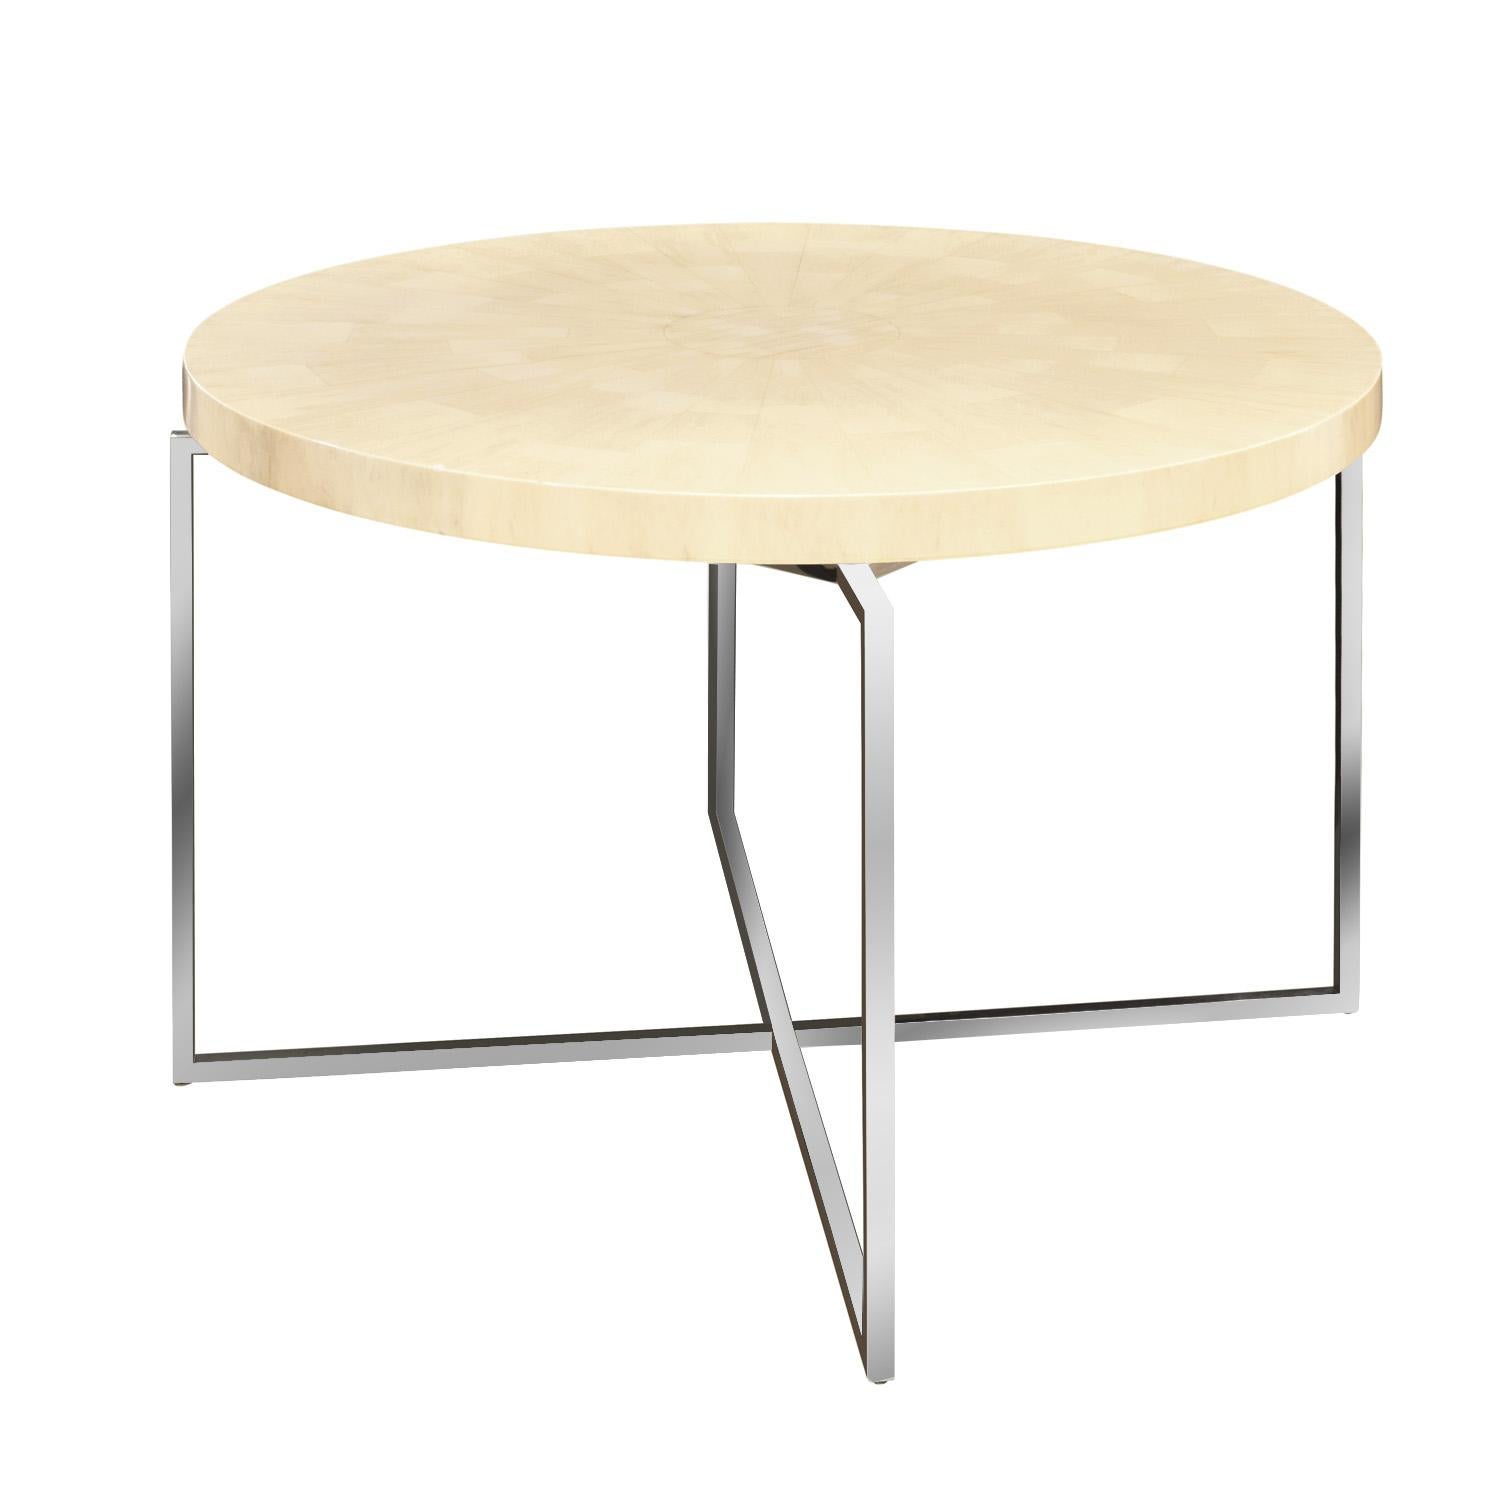 Chic center / game table model 701 with tessellated birch wood top and polished chrome base by Tommi Parzinger for Parzinger Originals, American 1970's. The artisan tessellated top makes a beautiful pie-shape pattern. The chrome base is designed to